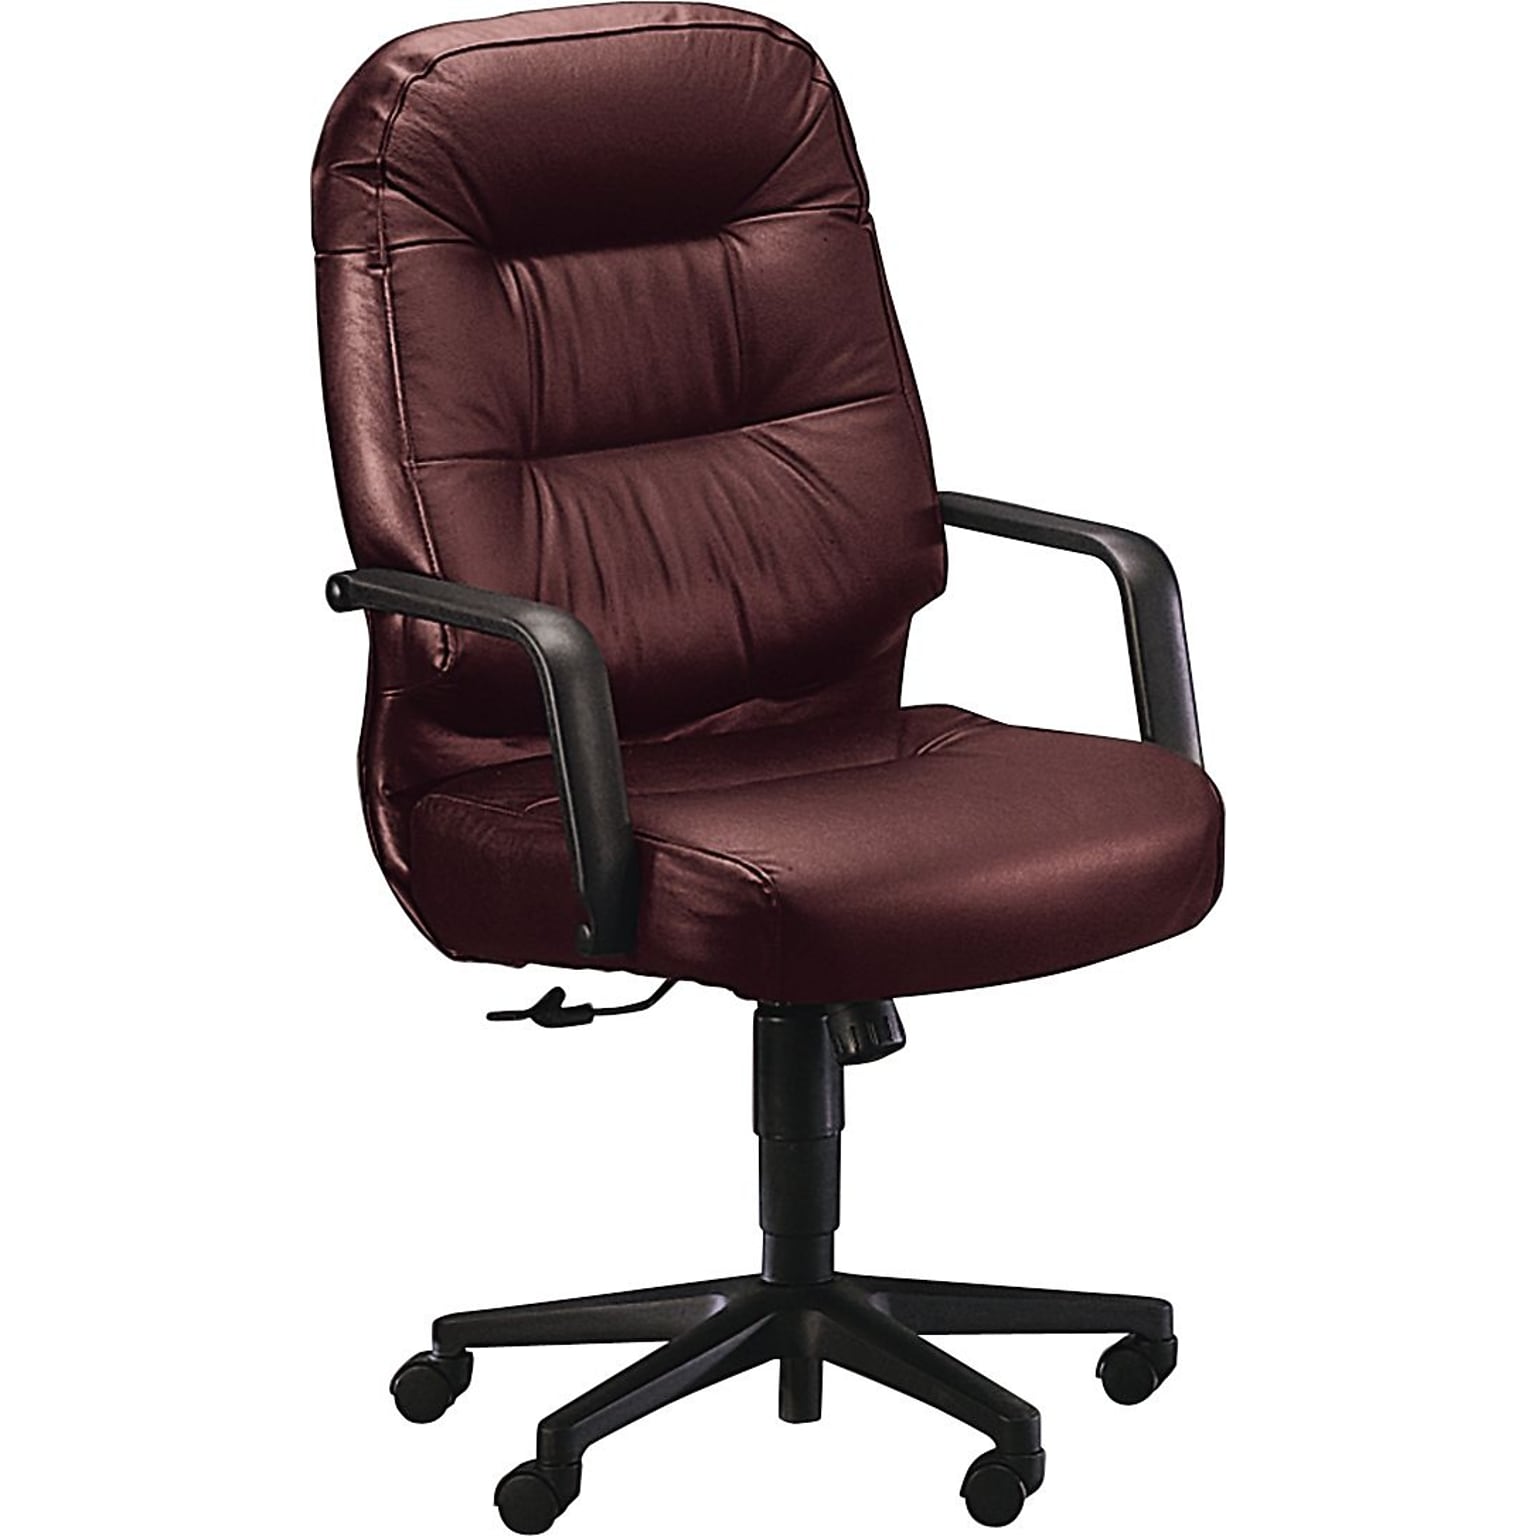 HON Pillow-Soft 2090 Executive/Office Chair, Leather, Burgundy, Seat: 22W x 18 1/2D, Back: 22W x 25H